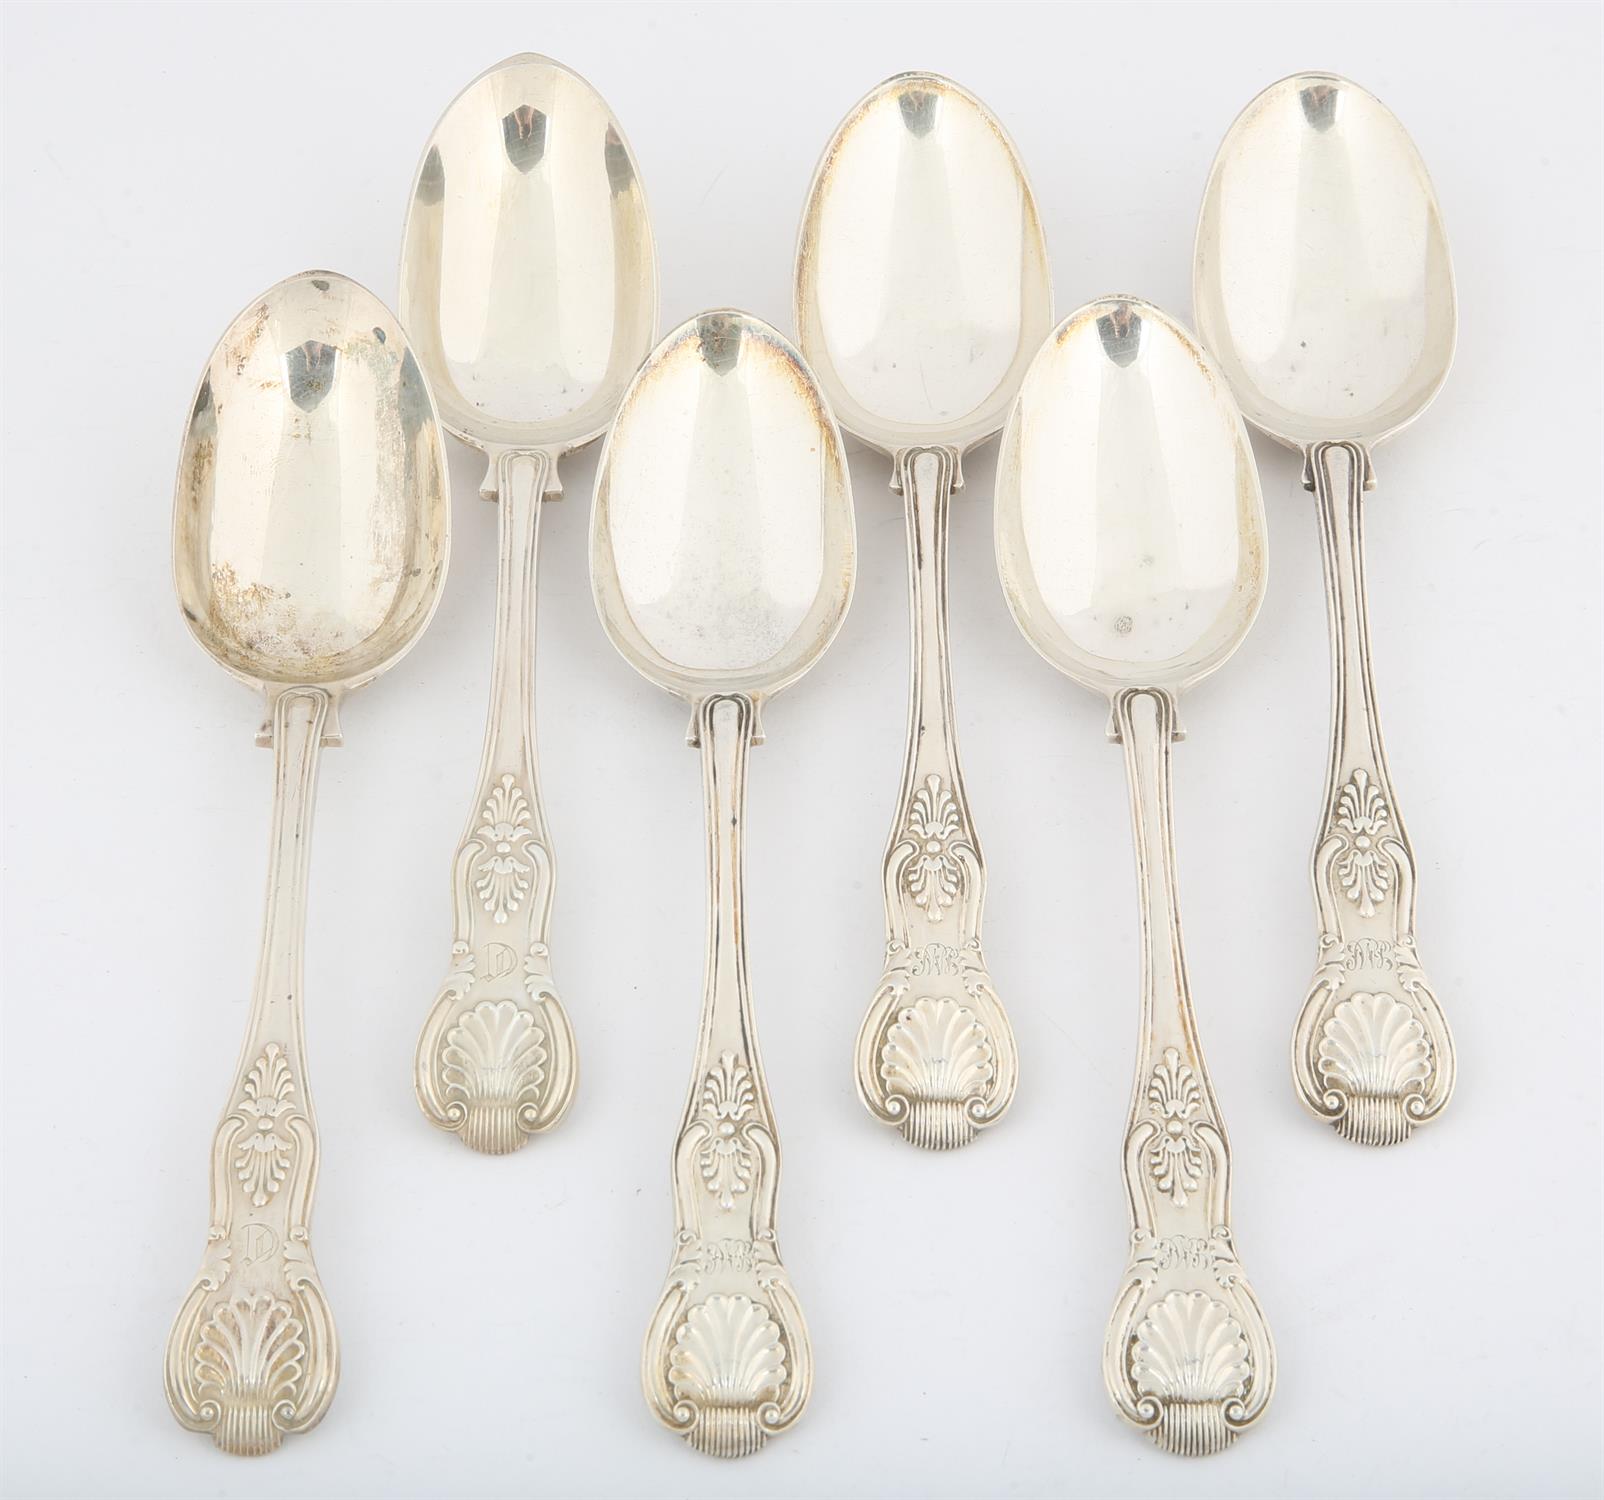 Matched kings pattern Victorian silver, double struck table spoons, two different dates, - Image 3 of 4